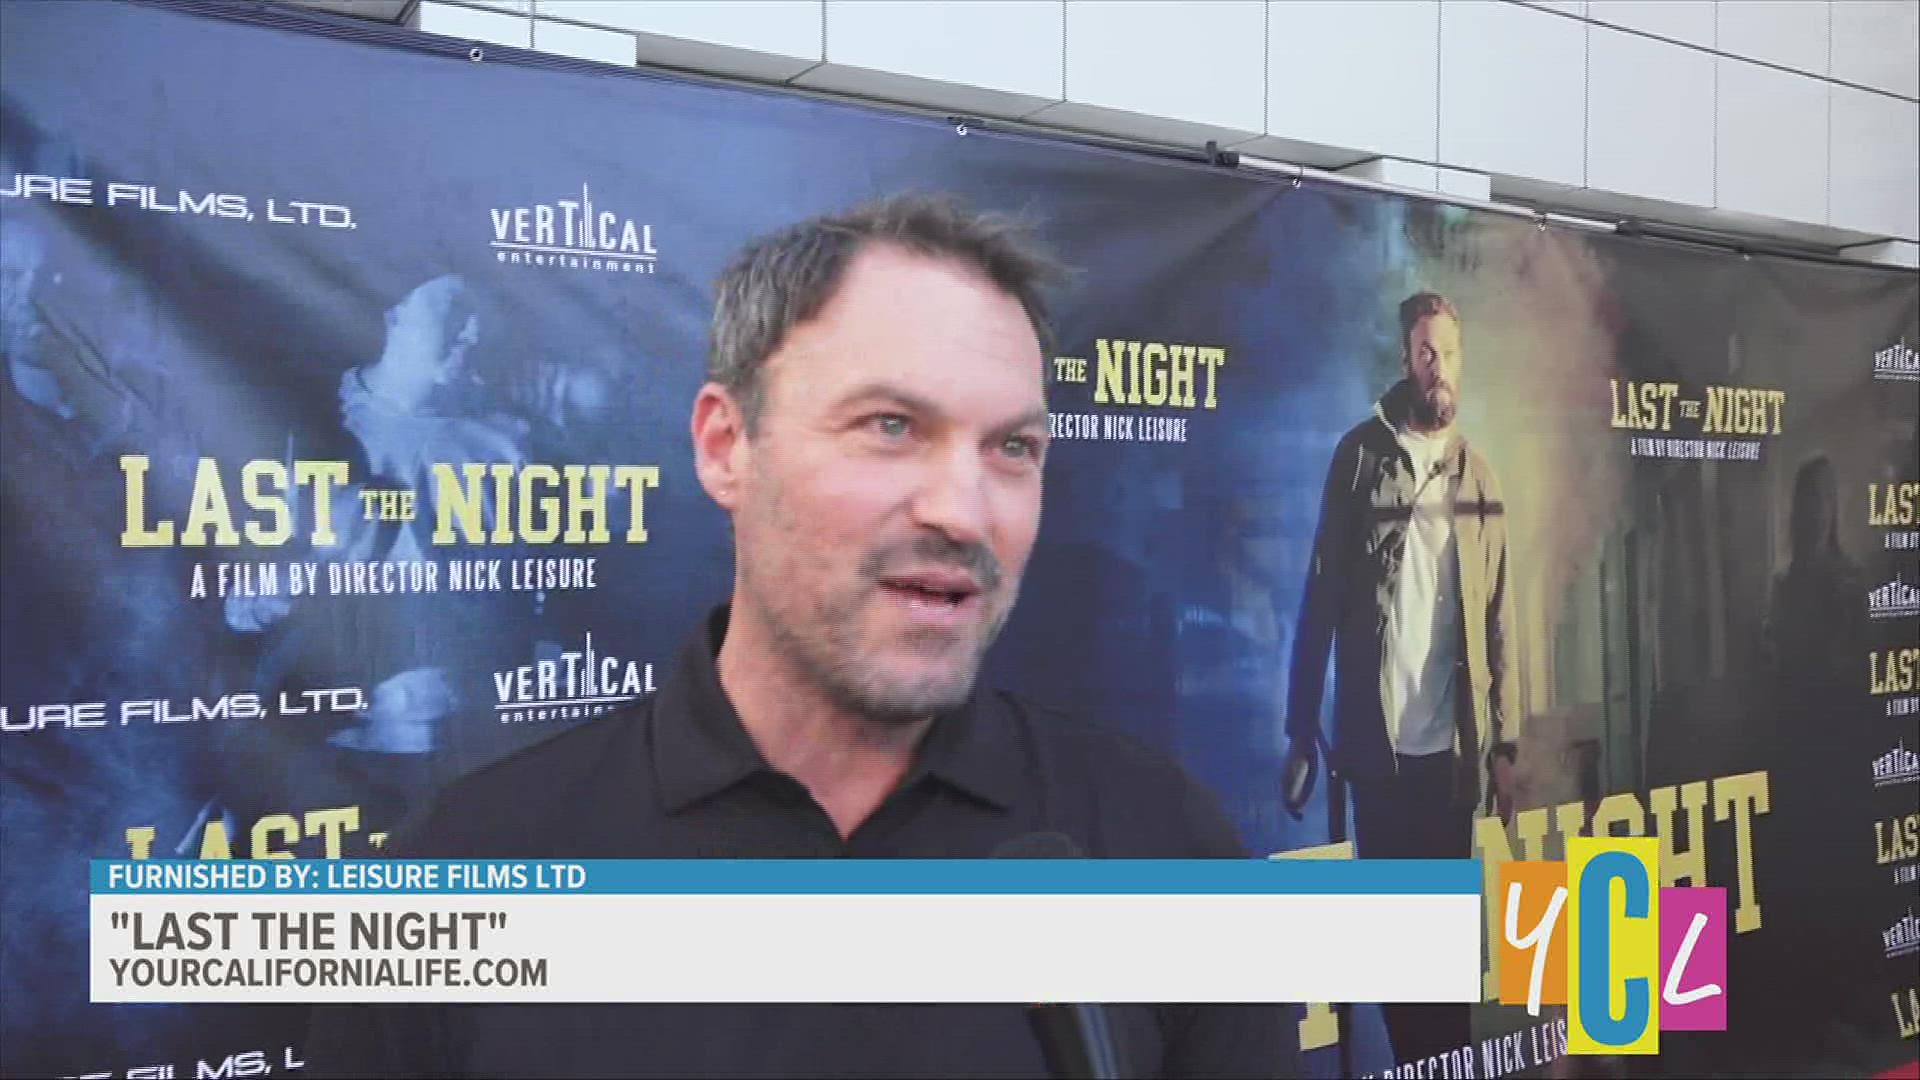 "Last the Night" stars Brian Austin Green and was filmed in Sacramento. It premiered at the 27th Annual Sac International Film Festival at the Crocker Art Museum.